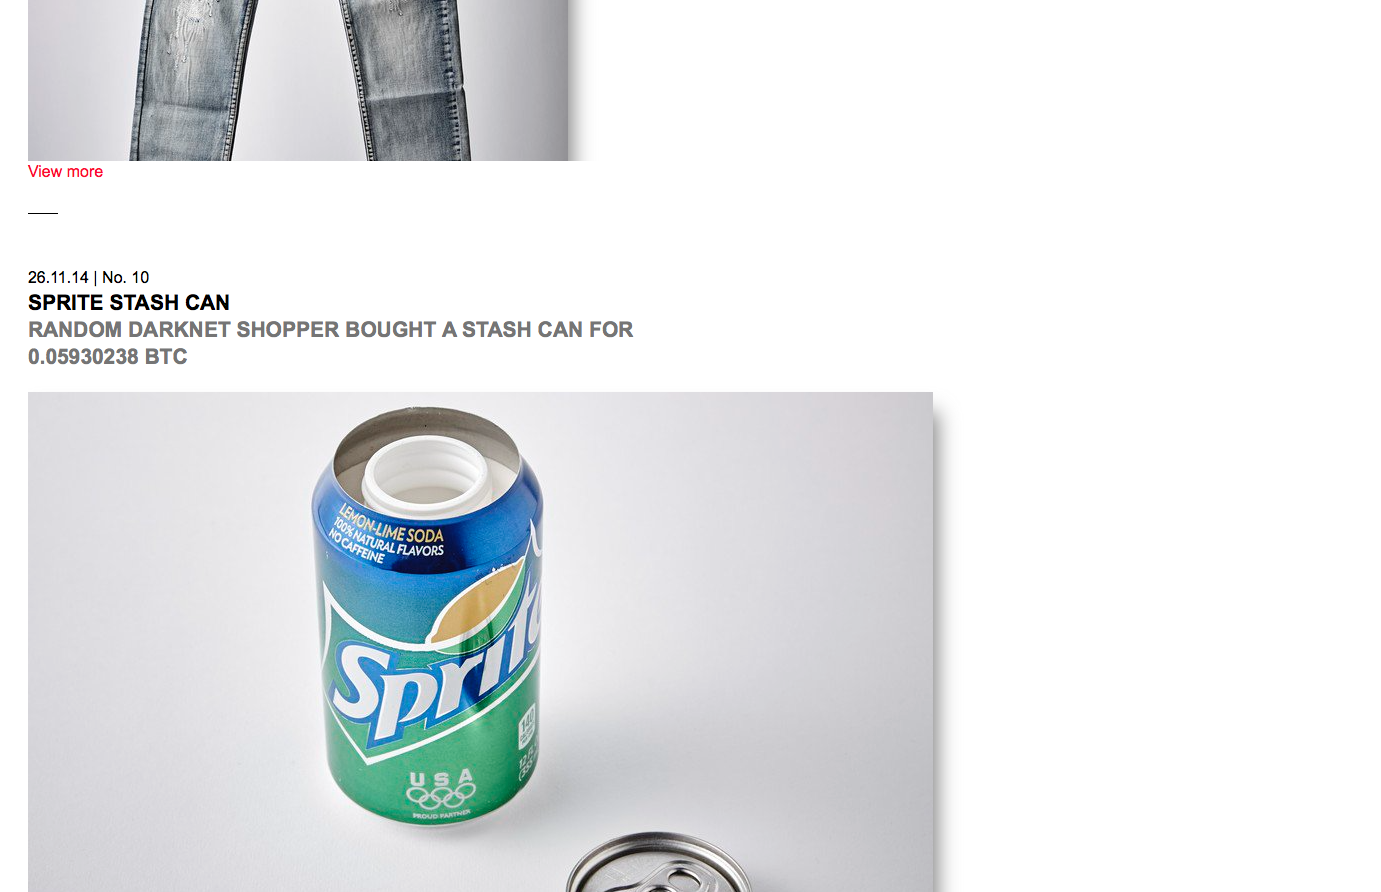 Screenshot of a "Sprite Stash Can" bought at Darknet